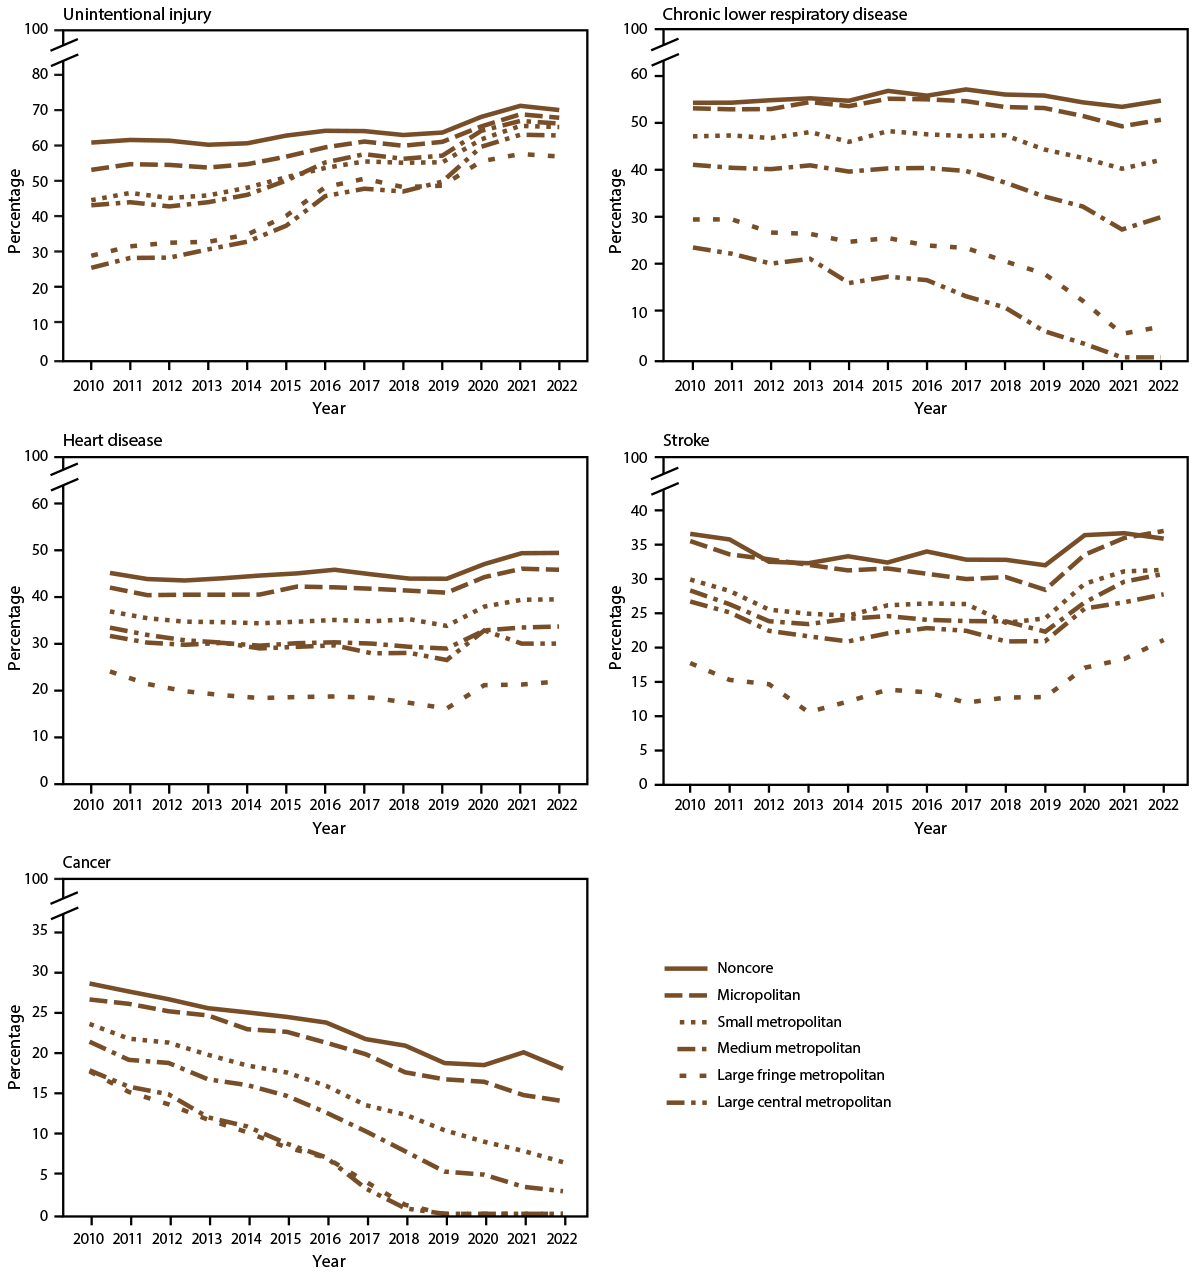 A composite figure of five line graphs indicates the percentages of preventable premature deaths among persons aged less than 80 years from the five leading causes of death (cancer, stroke, heart disease, chronic lower respiratory disease, and unintentional injury) by urban-rural county classification and year for the years 2010–2022. The data source is the U.S. National Vital Statistics System.